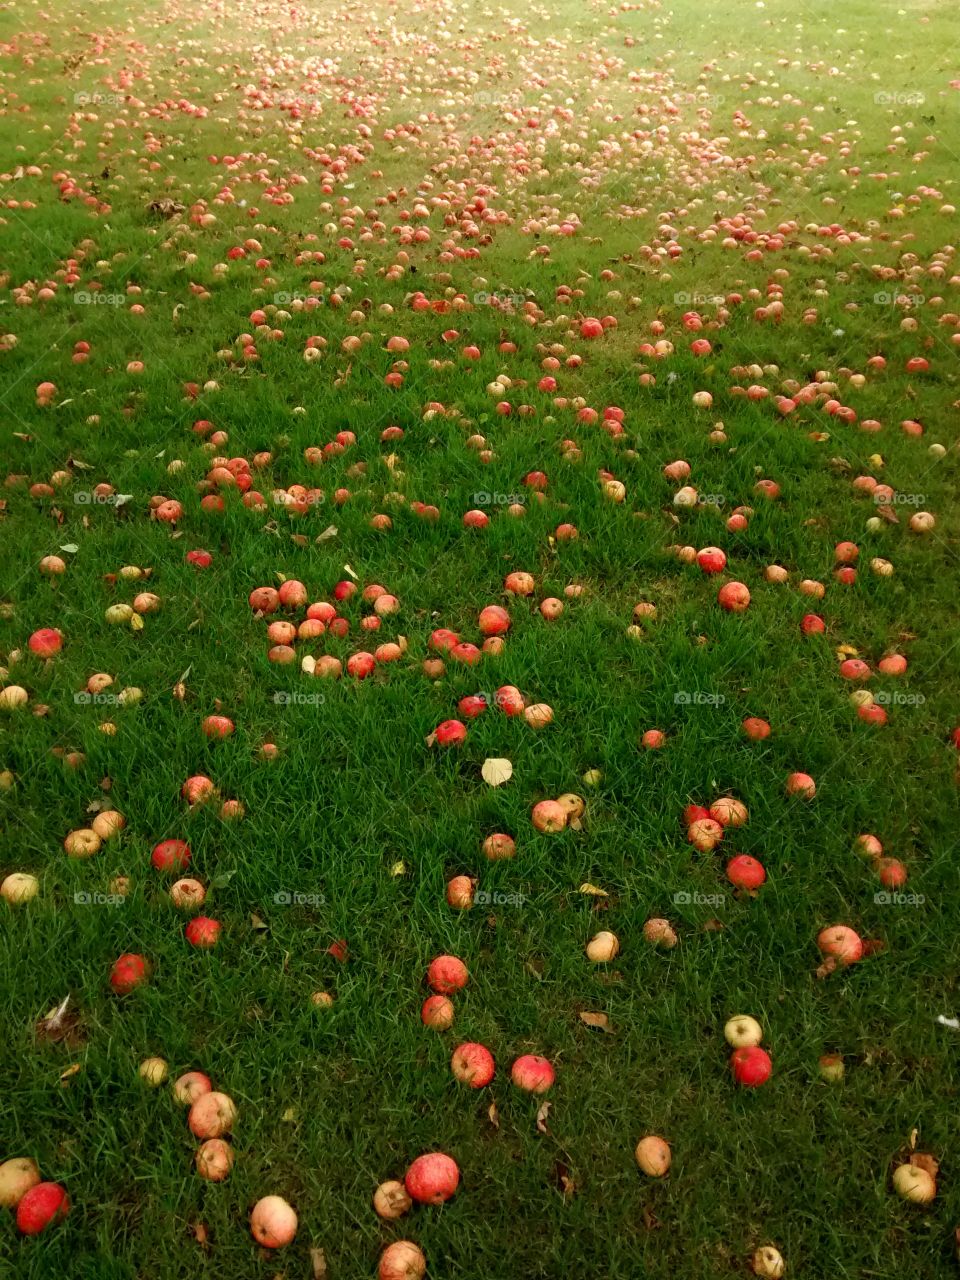 Windfall Apples Galore